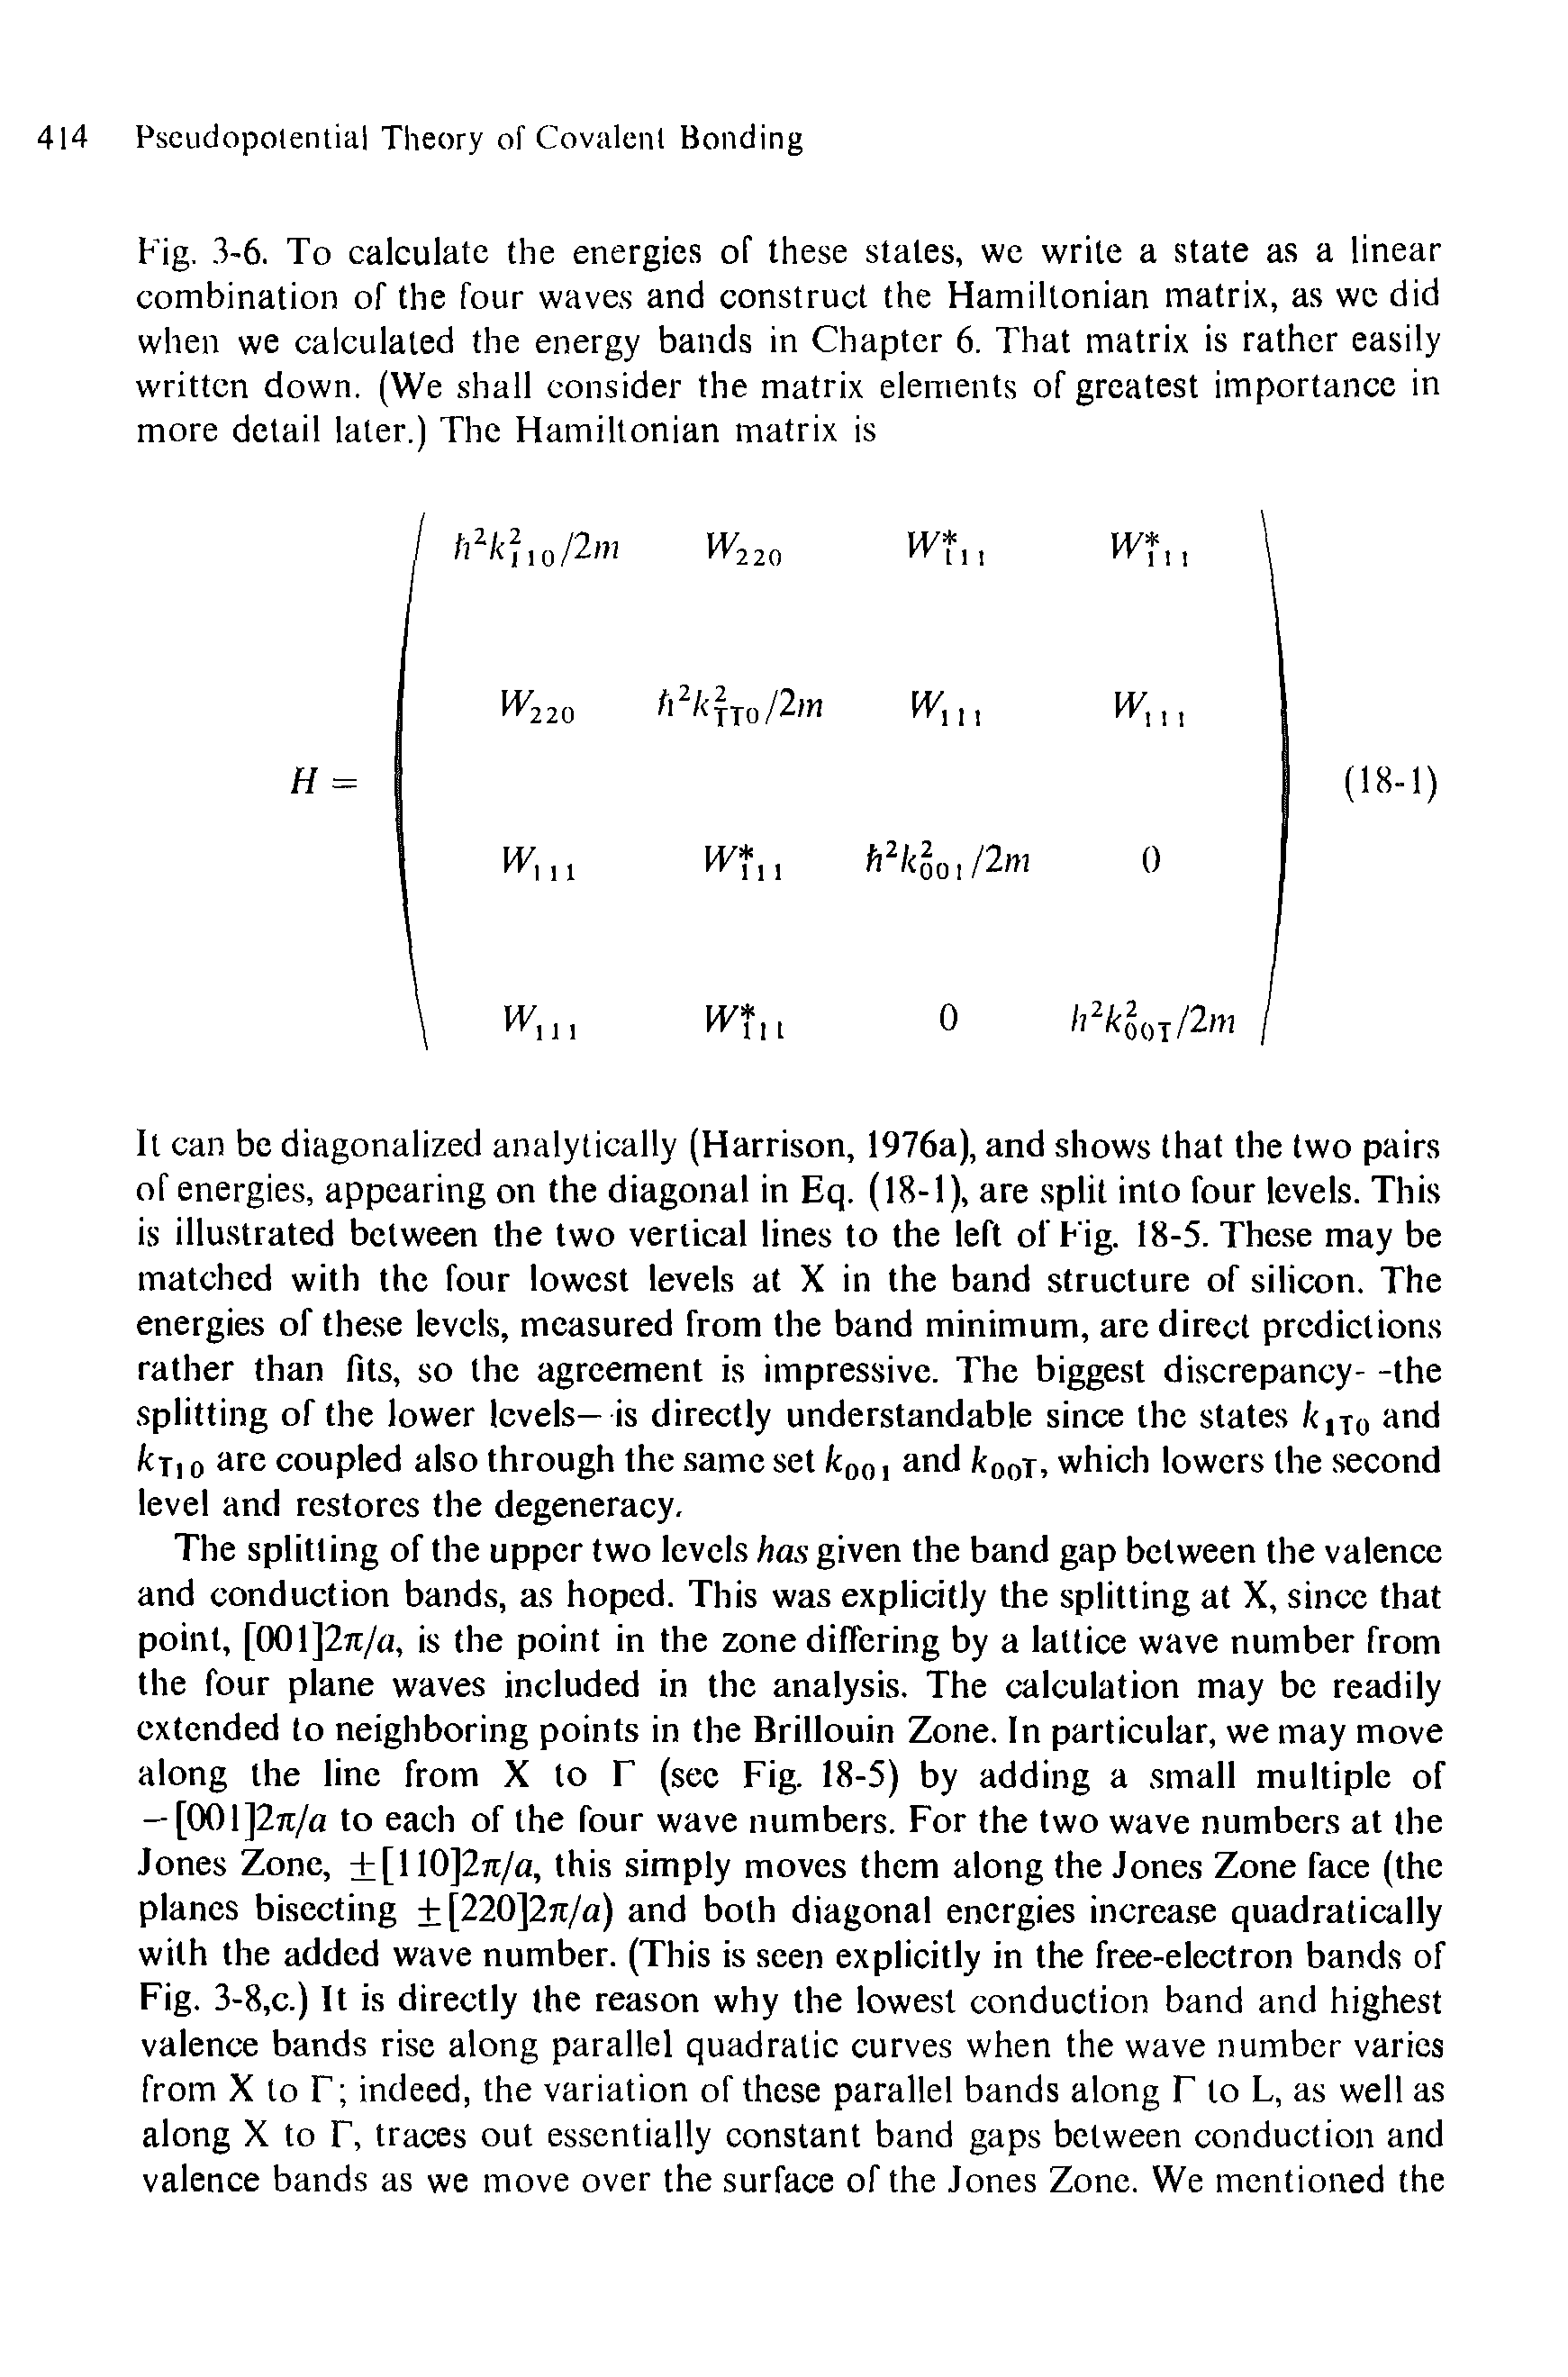 Fig. -3-6. To calculate the energies of these stales, we write a state as a linear combination of the four waves and construct the Hamiltonian matrix, as we did when we calculated the energy bands in Chapter 6. That matrix is rather easily written down. (We shall consider the matrix elements of greatest importance in more detail later.) The Hamiltonian matrix is...